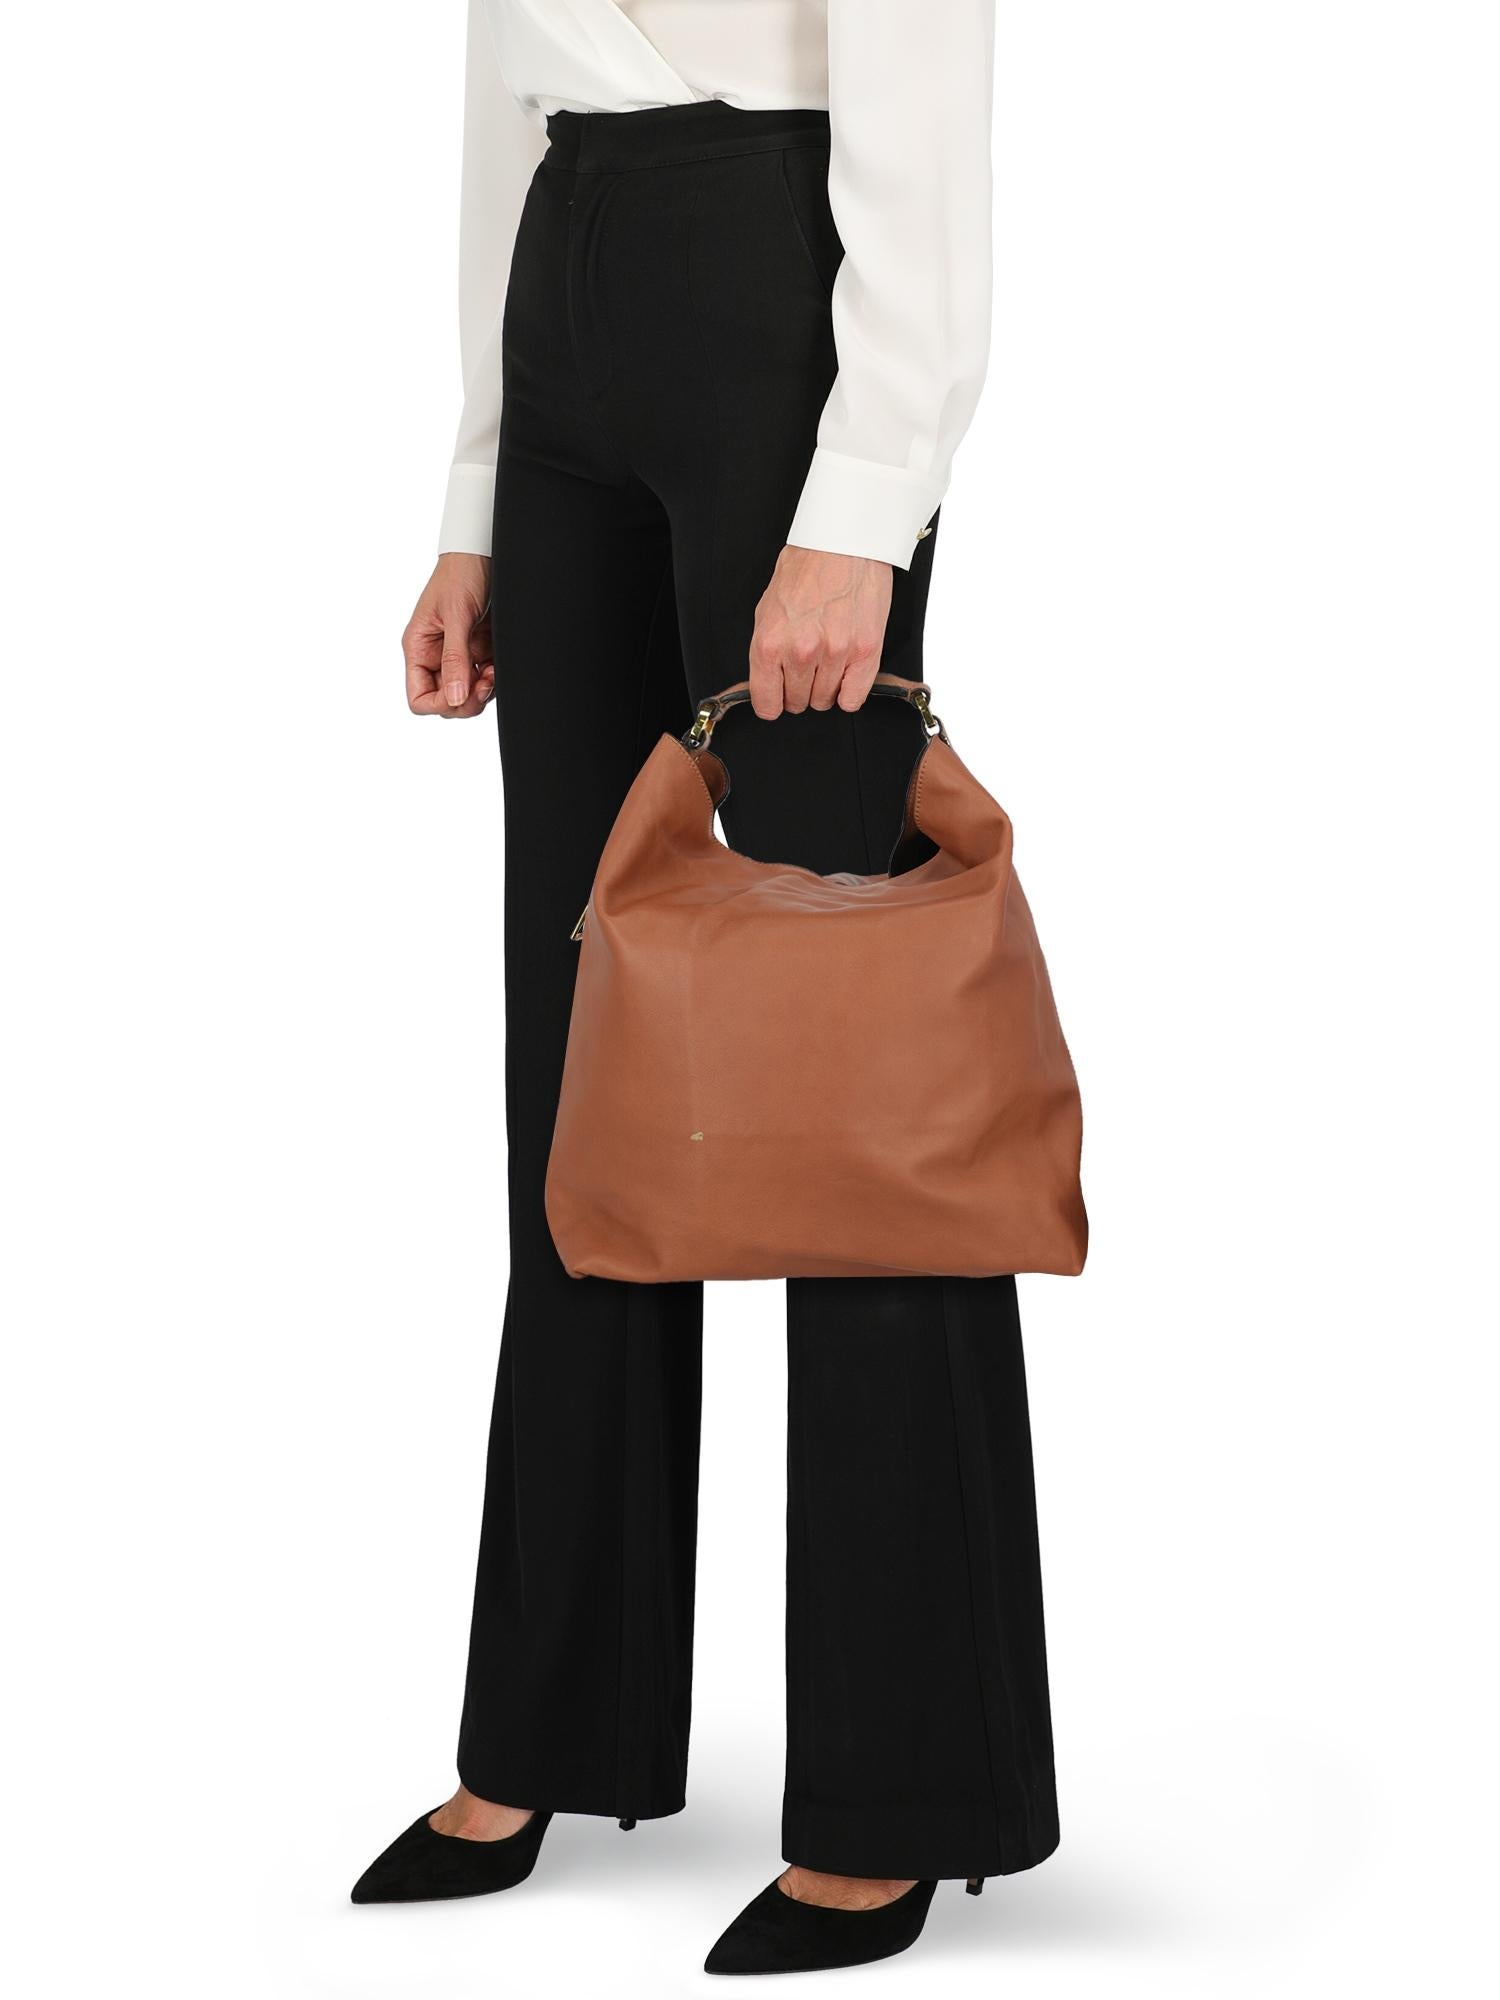 Woman, leather, solid color, internal logo, gold-tone hardware, external pocket, internal slip pocket, day bag.

Includes:
- Dust bag

Product Condition: Good
Lining: negligible stain. Hardware: slightly visible discoloration. Corners and edges: